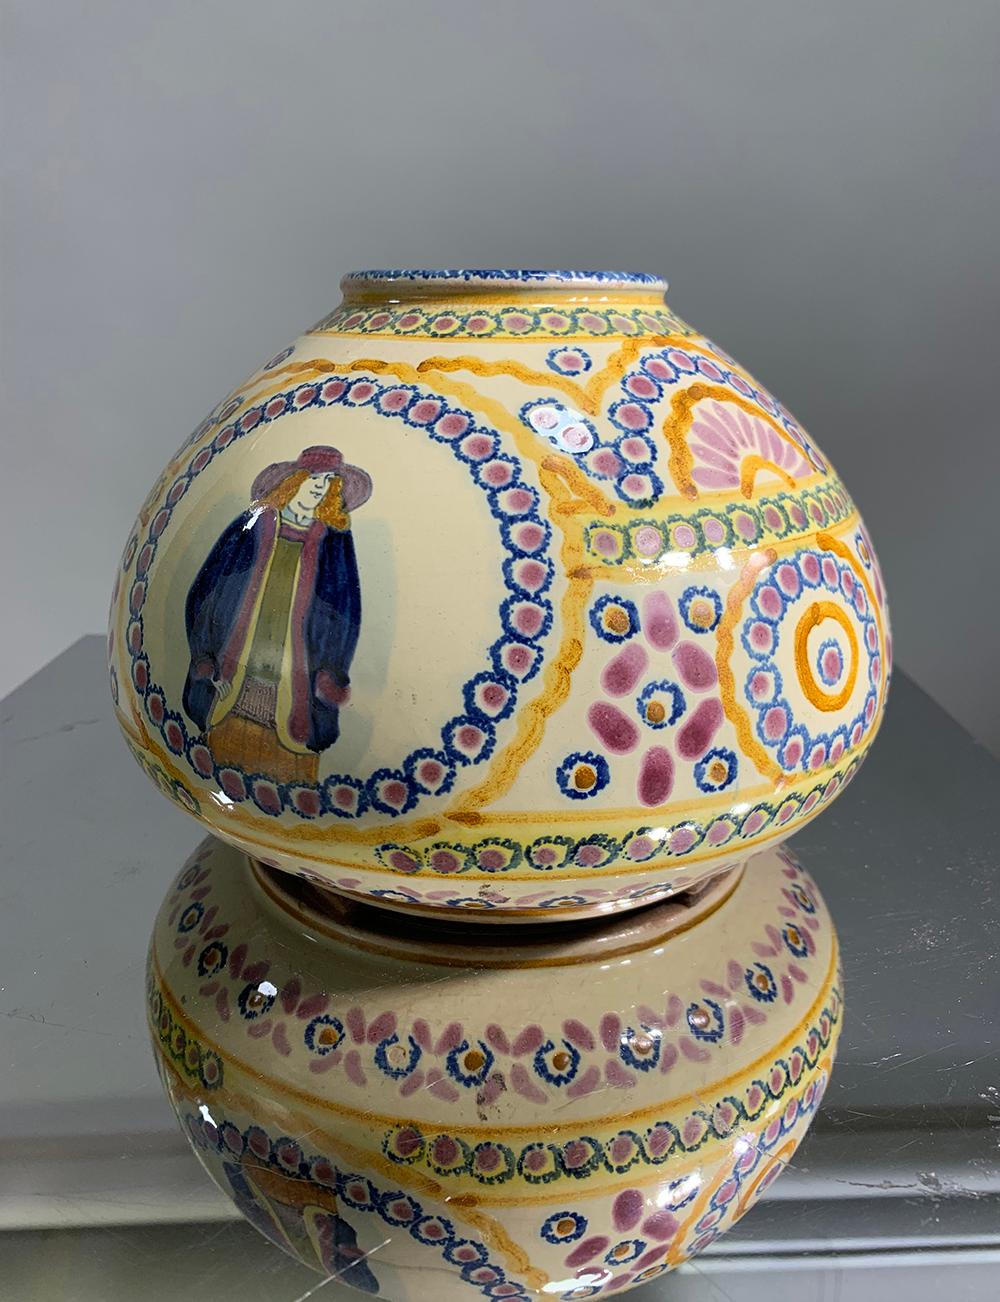 This beautiful faience piece features colorful hand painted decor. The painted elements include a framer dressed in traditional, historically accurate clothing with floral decor .
The vase is in excellent condition and is signed and numbered on the